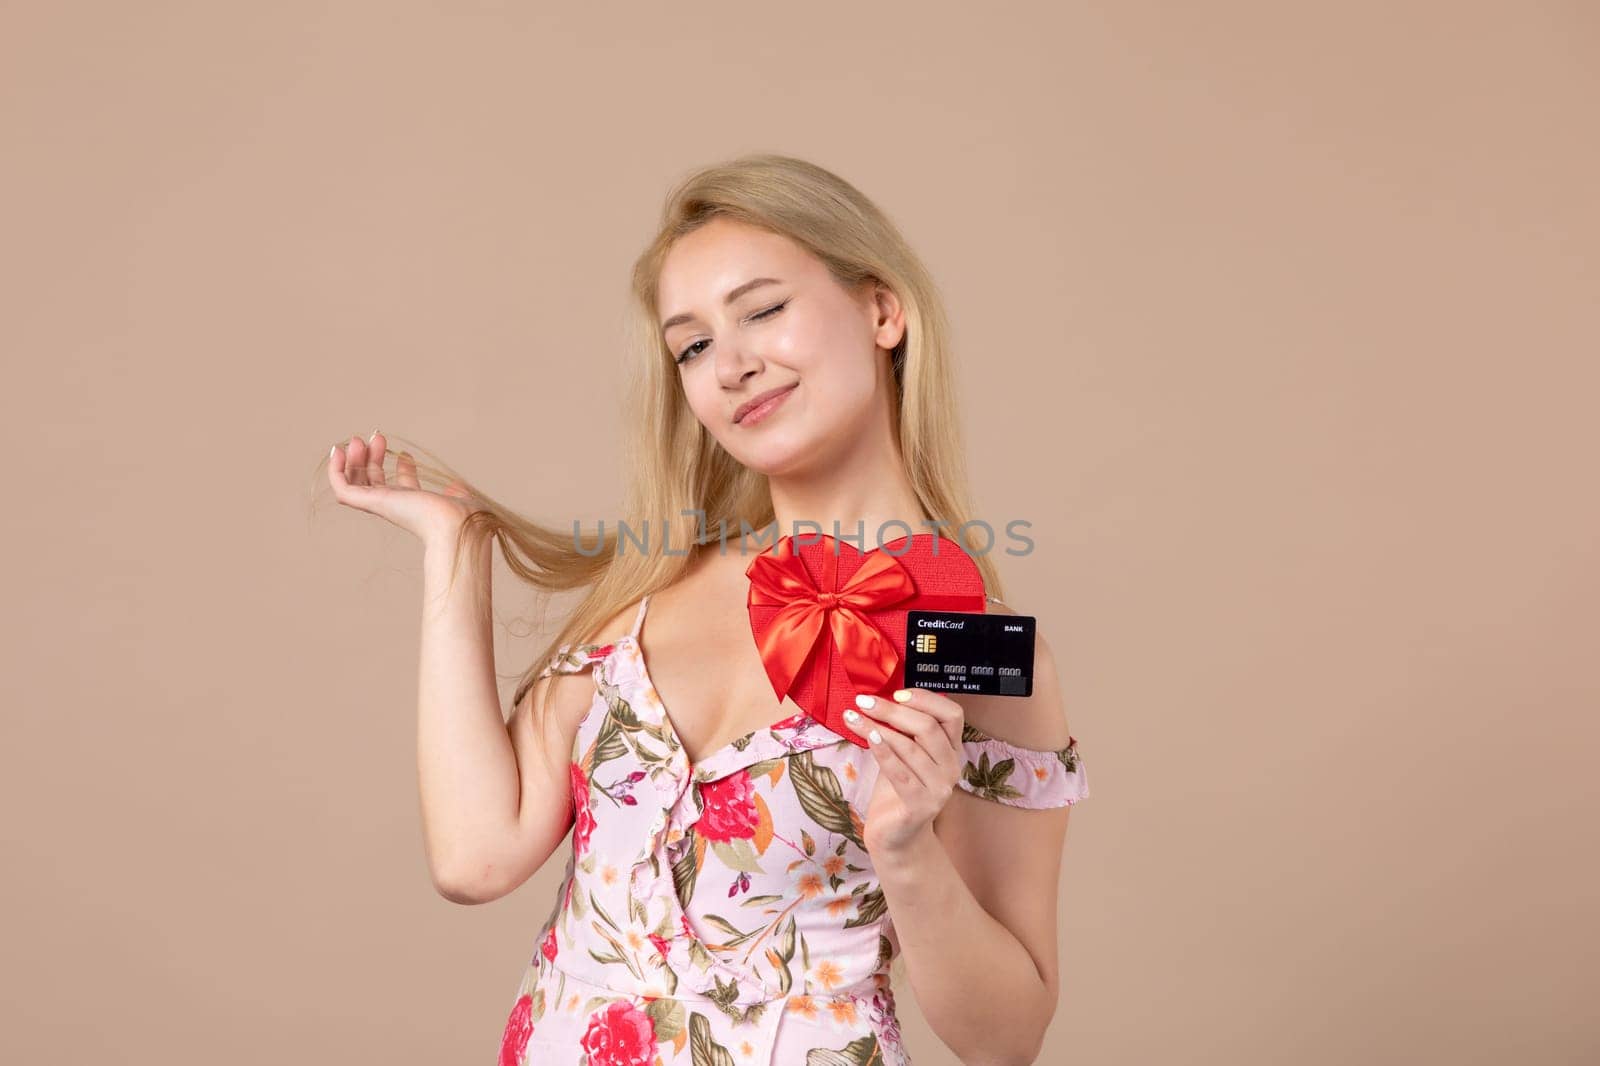 front view young female posing with red heart shaped present and bank card on brown background money march woman sensual horizontal equality